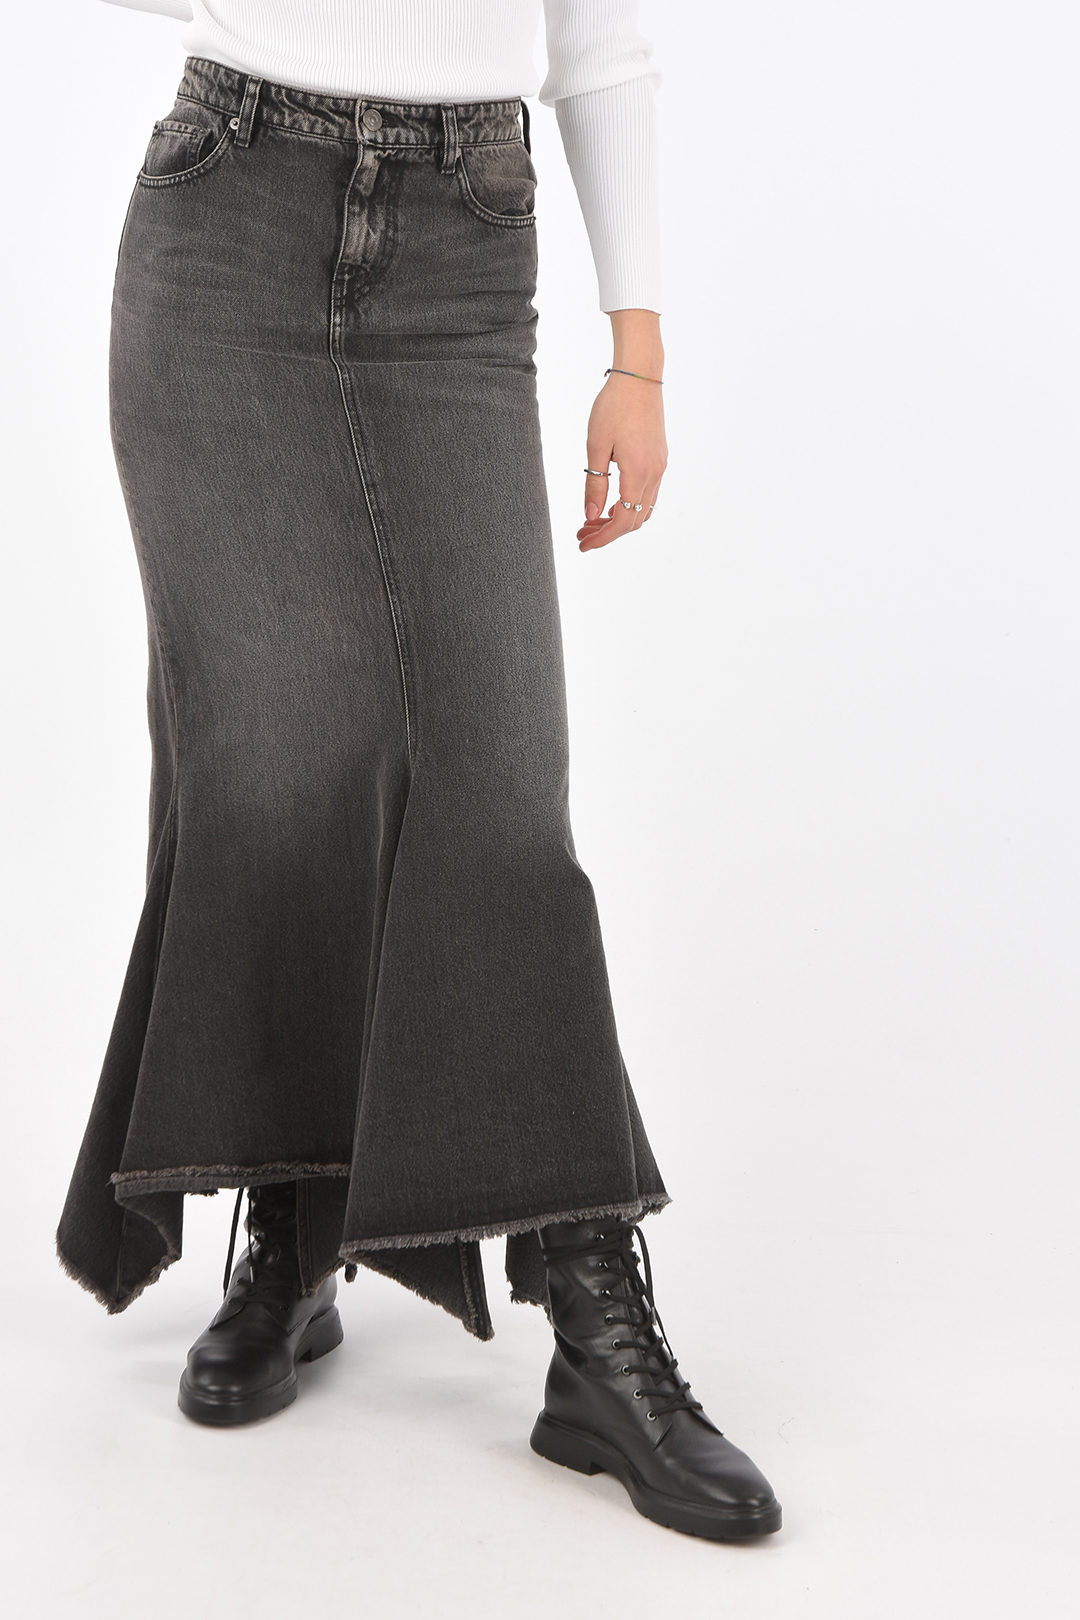 Shop Denim Midi Skirt for Women from latest collection at Forever 21   498057